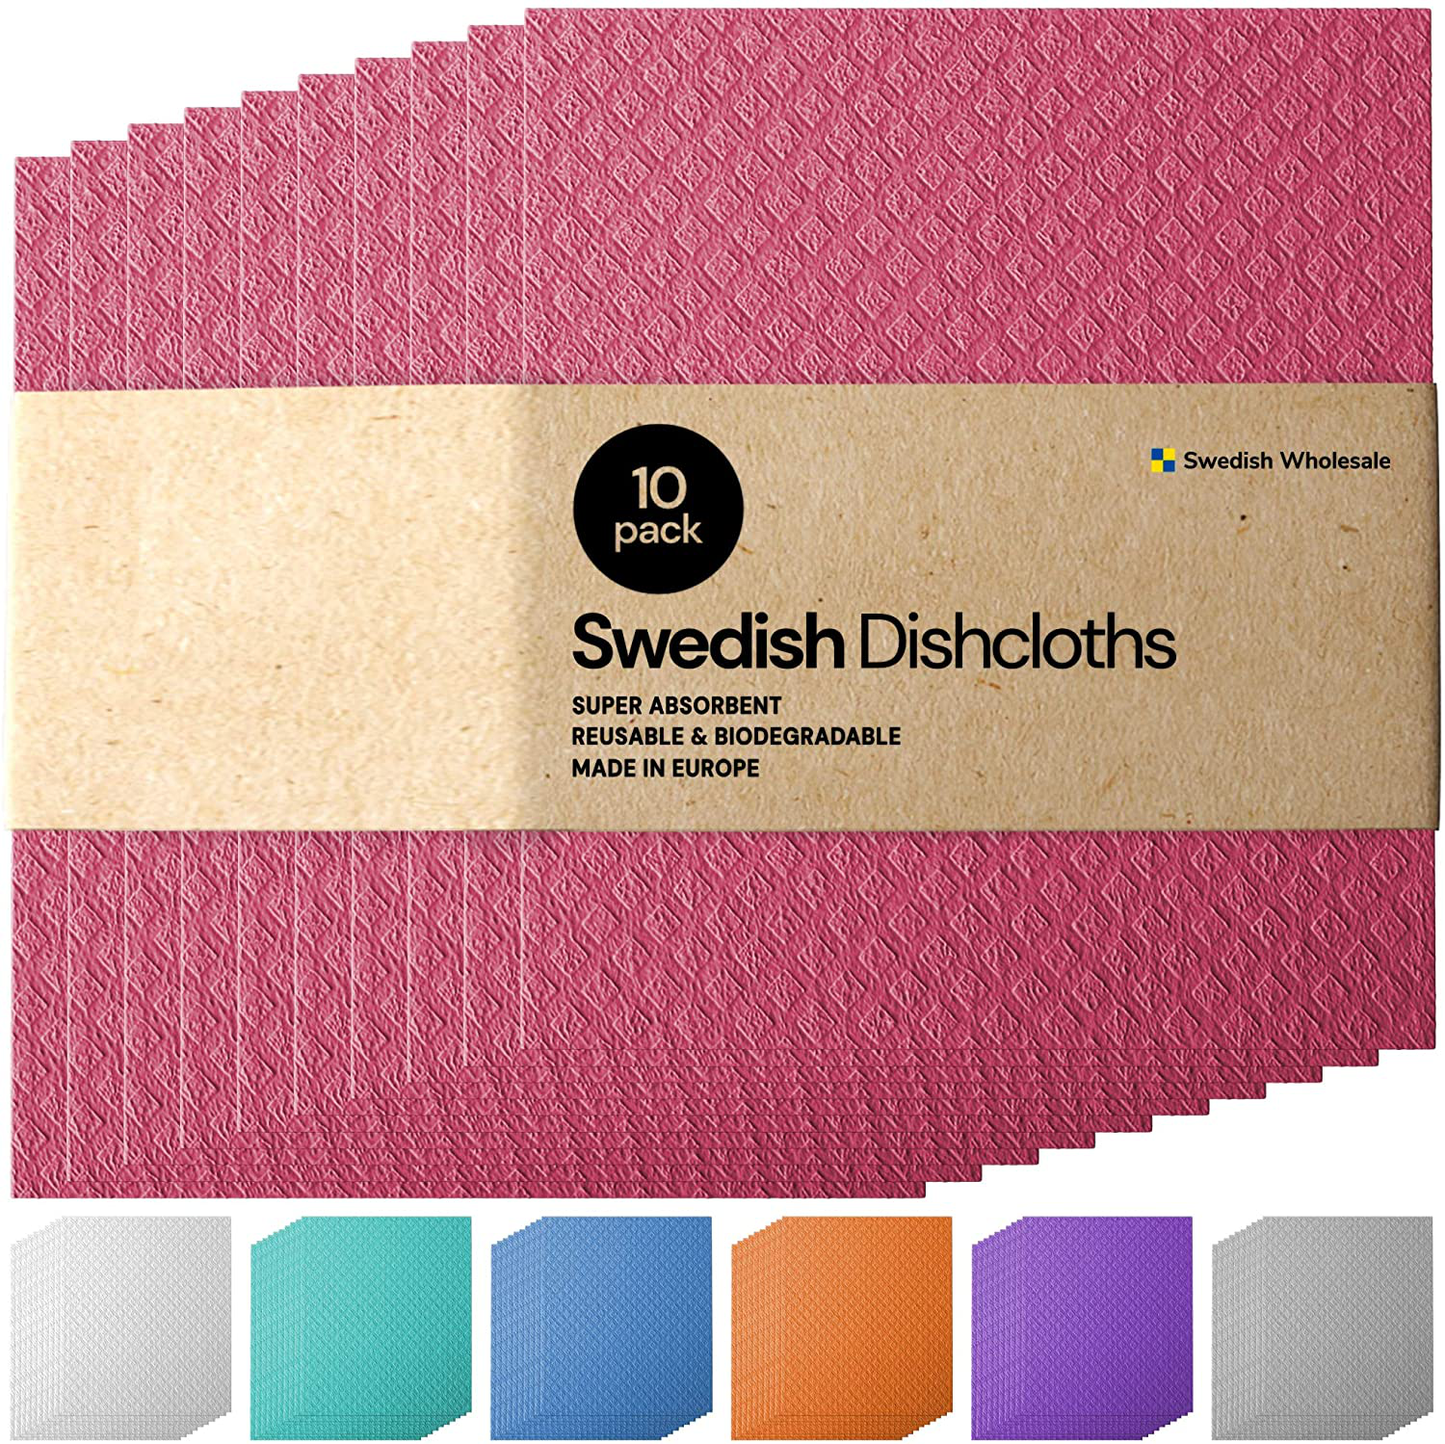 Swedish Dishcloth Cellulose Sponge Cloths - Bulk 10 Pack of Eco-Friendly No Odor Reusable Cleaning Cloths for Kitchen - Absorbent Dish Cloth Hand Towel